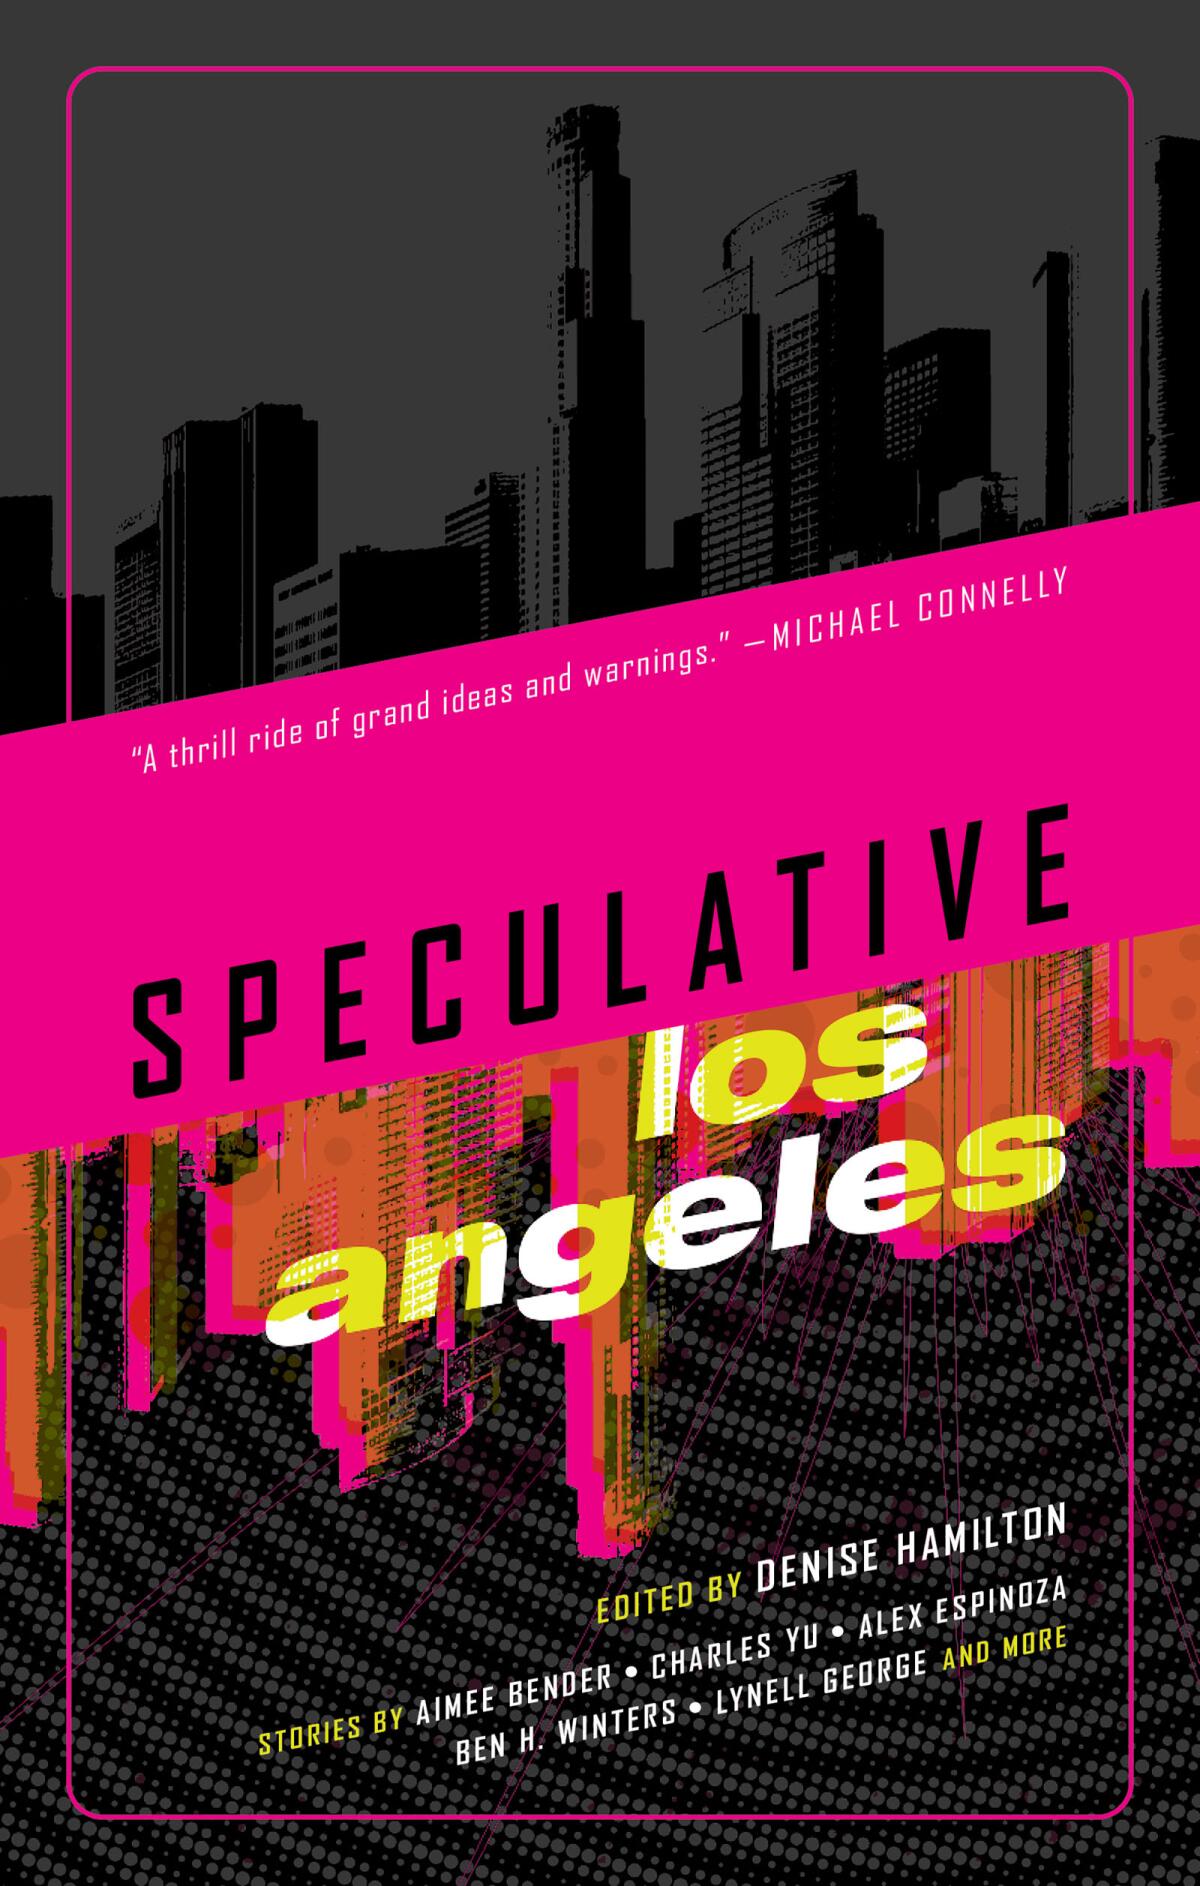 The Ultimate L.A. Bookshelf: Speculative Fiction - Los Angeles Times